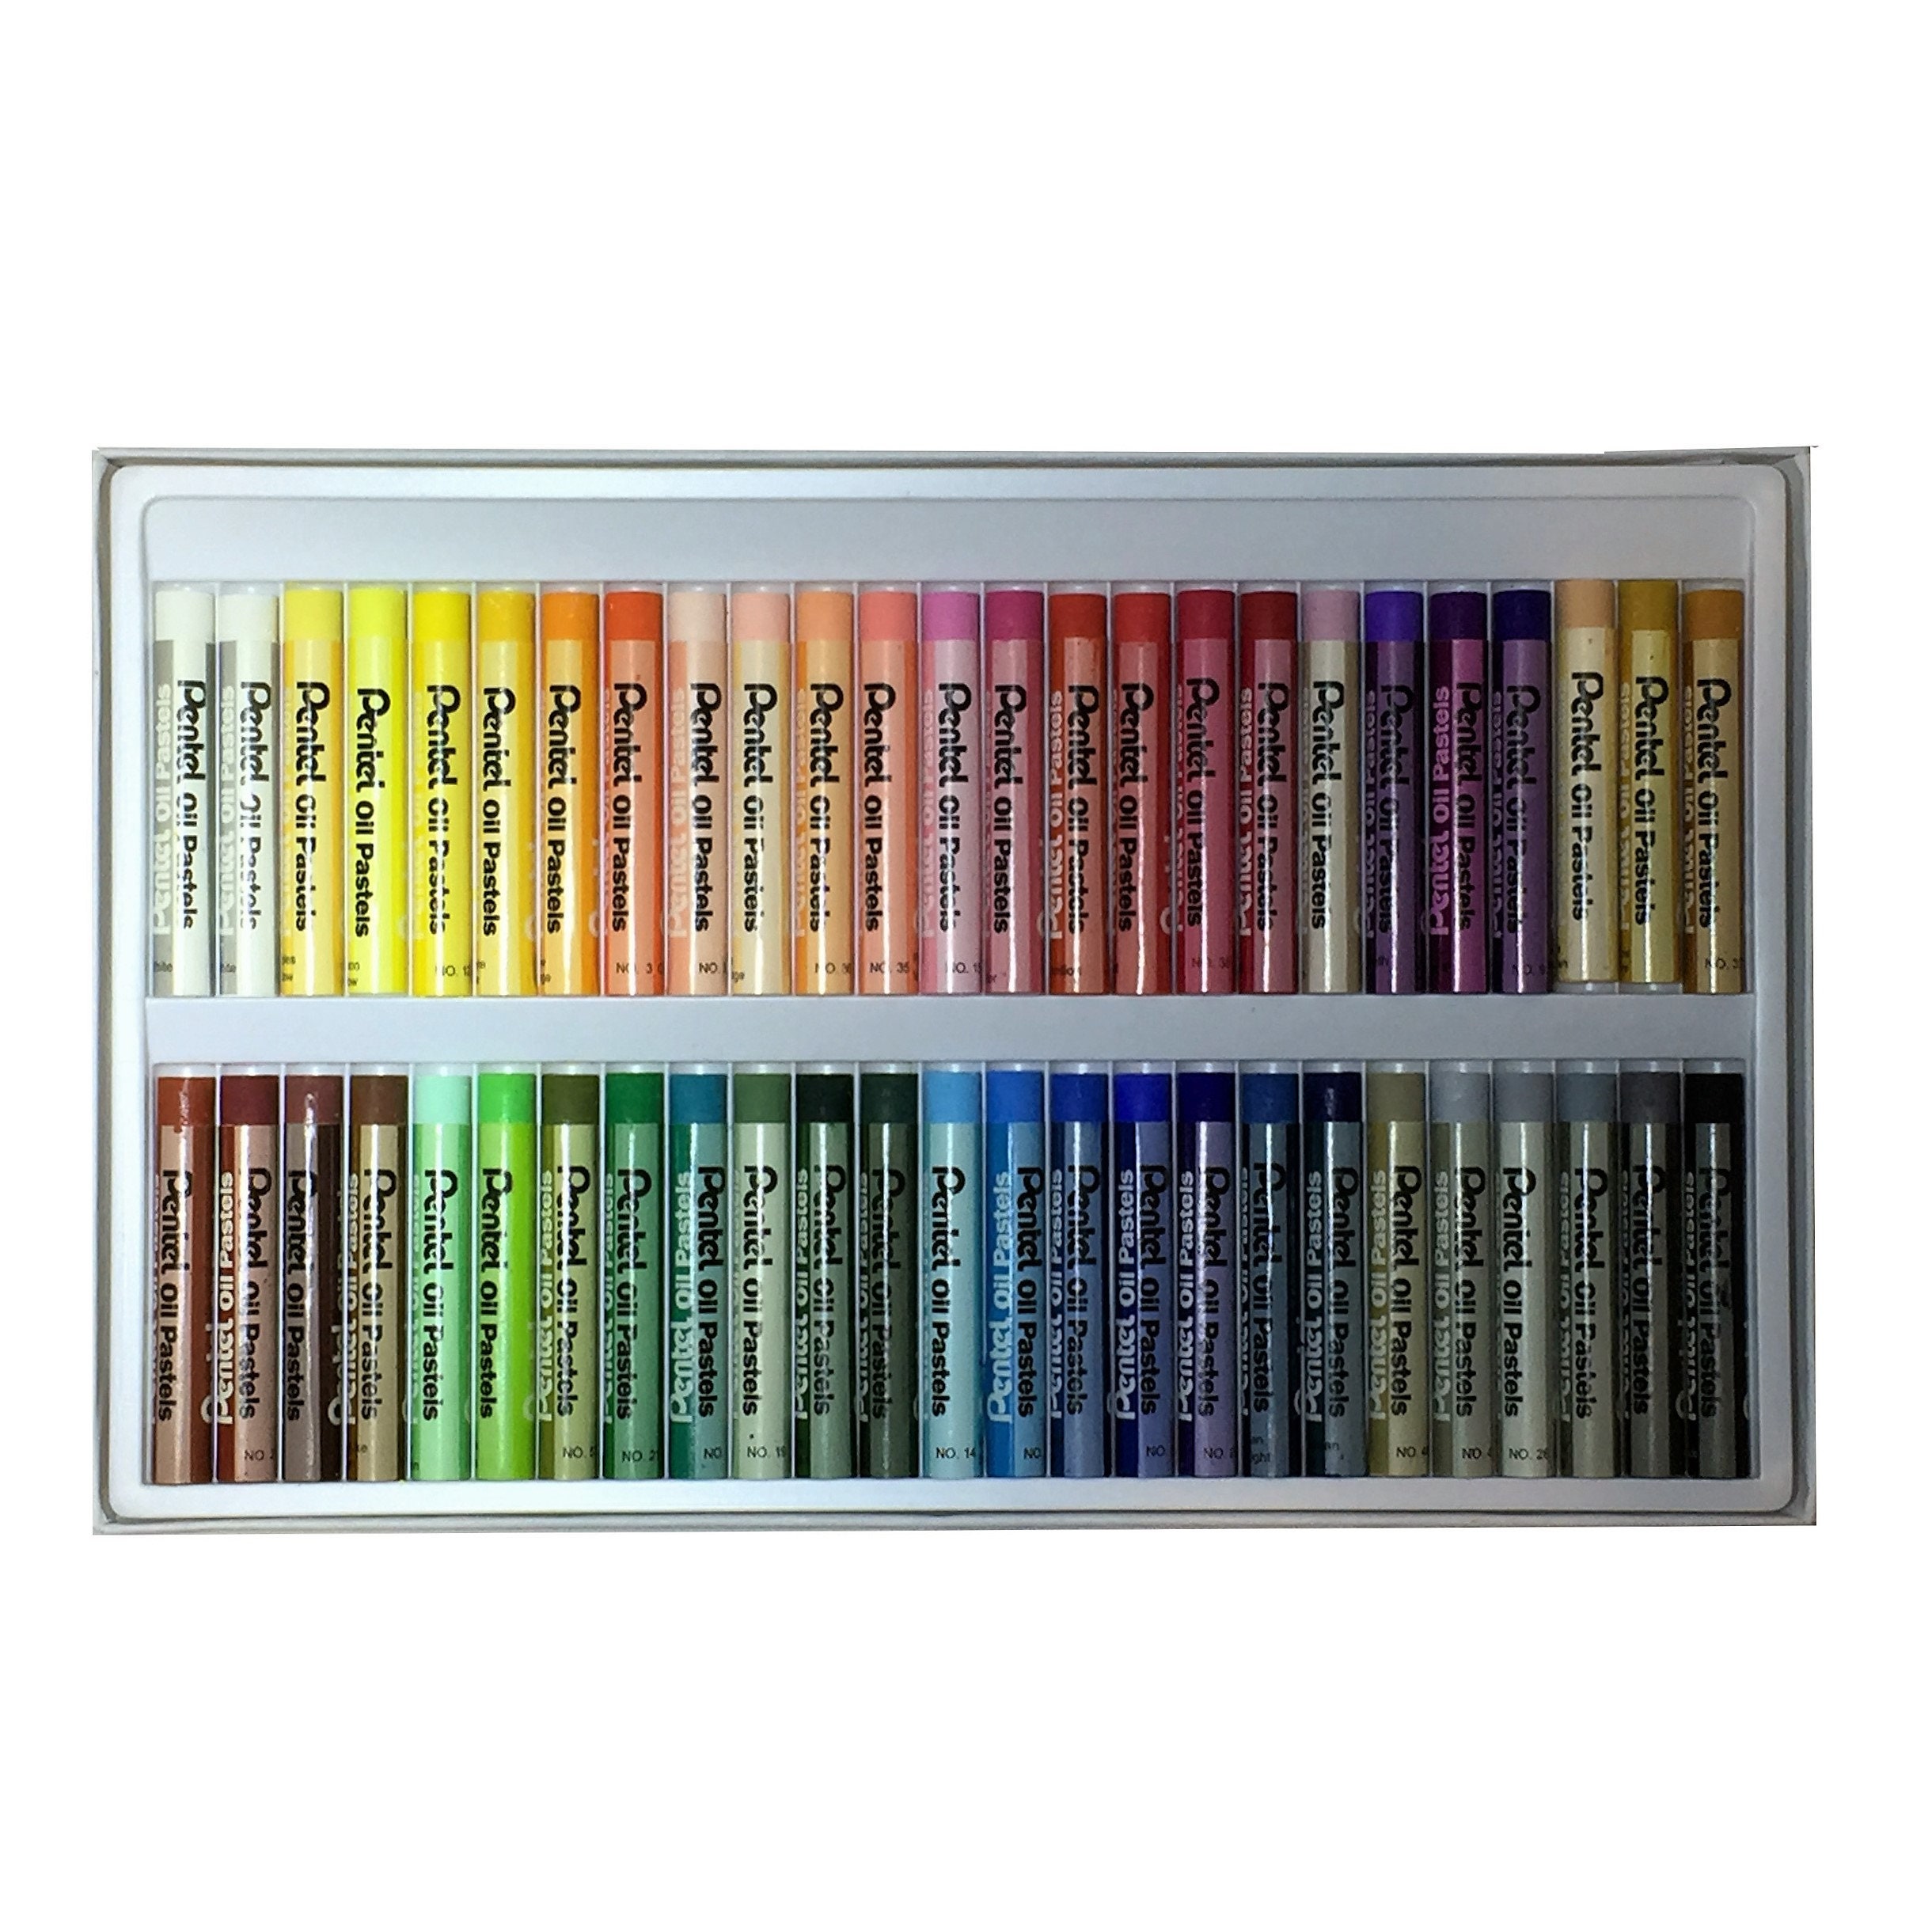 Pentel Oil Pastel Set with Carrying Case, Assorted Colors, 50 Pastels